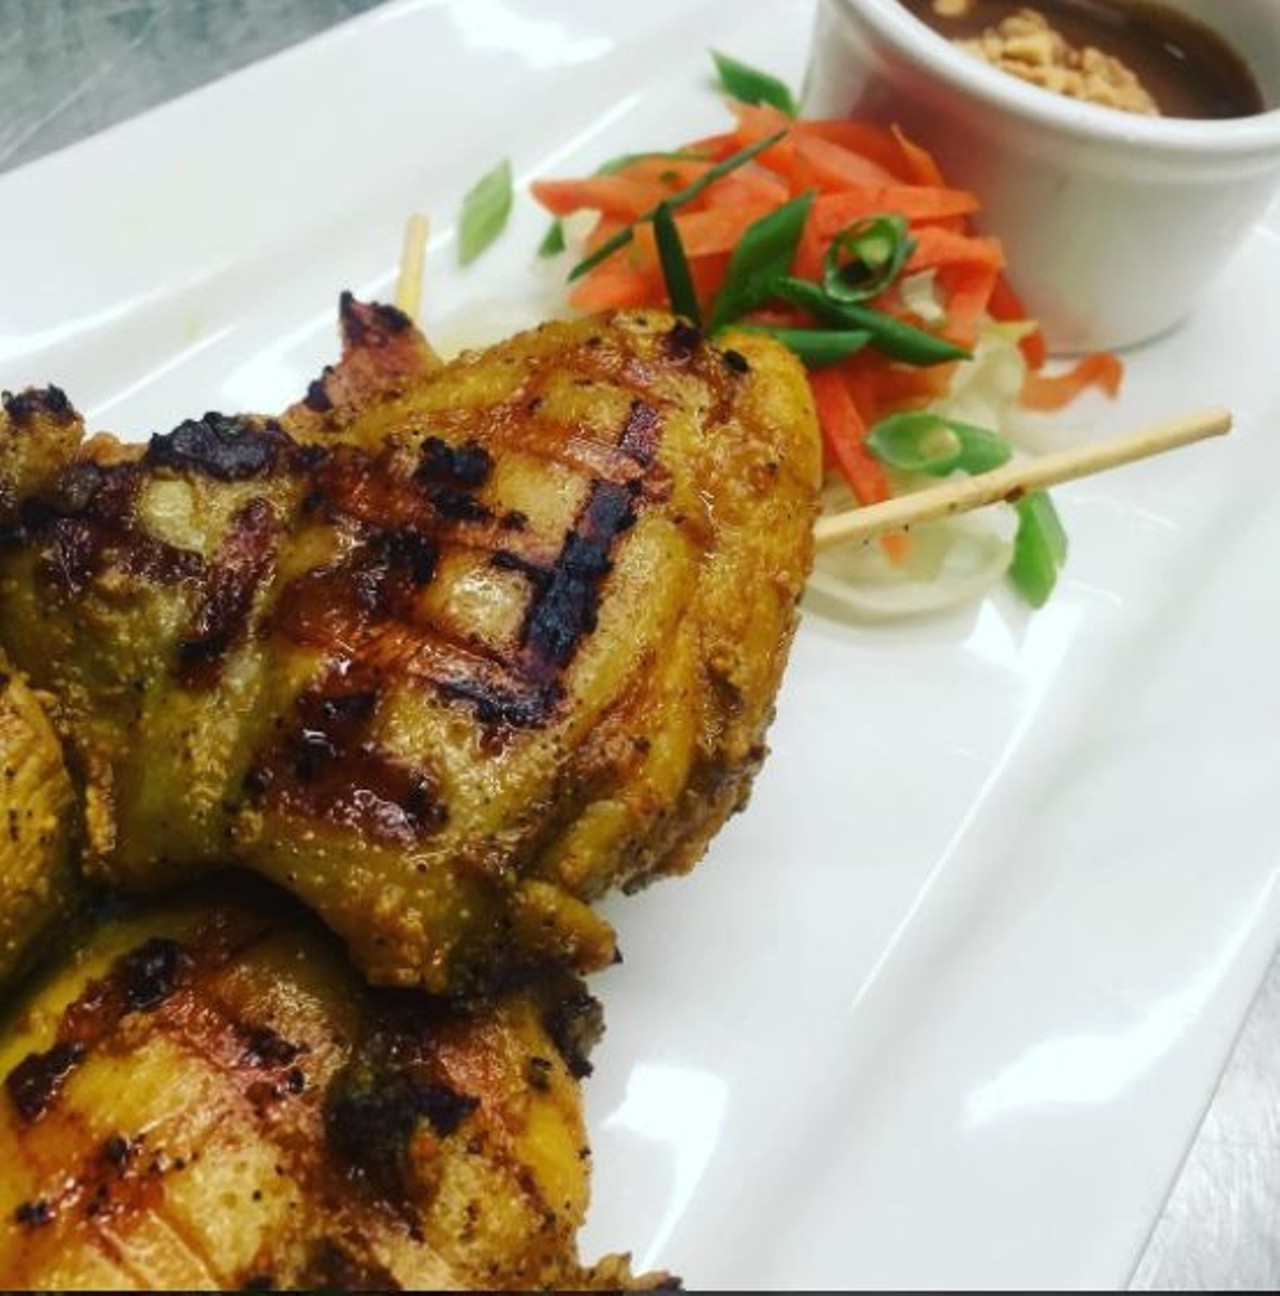  Chicken Satay at Bac
2661 W. 14th St., 216-938-8960
Why enjoy your grilled chicken with a fork and knife when you could do so on a stick? This Tremont spot has you covered with their perfectly-seasoned chicken satay.
Photo via bactremont/Instagram